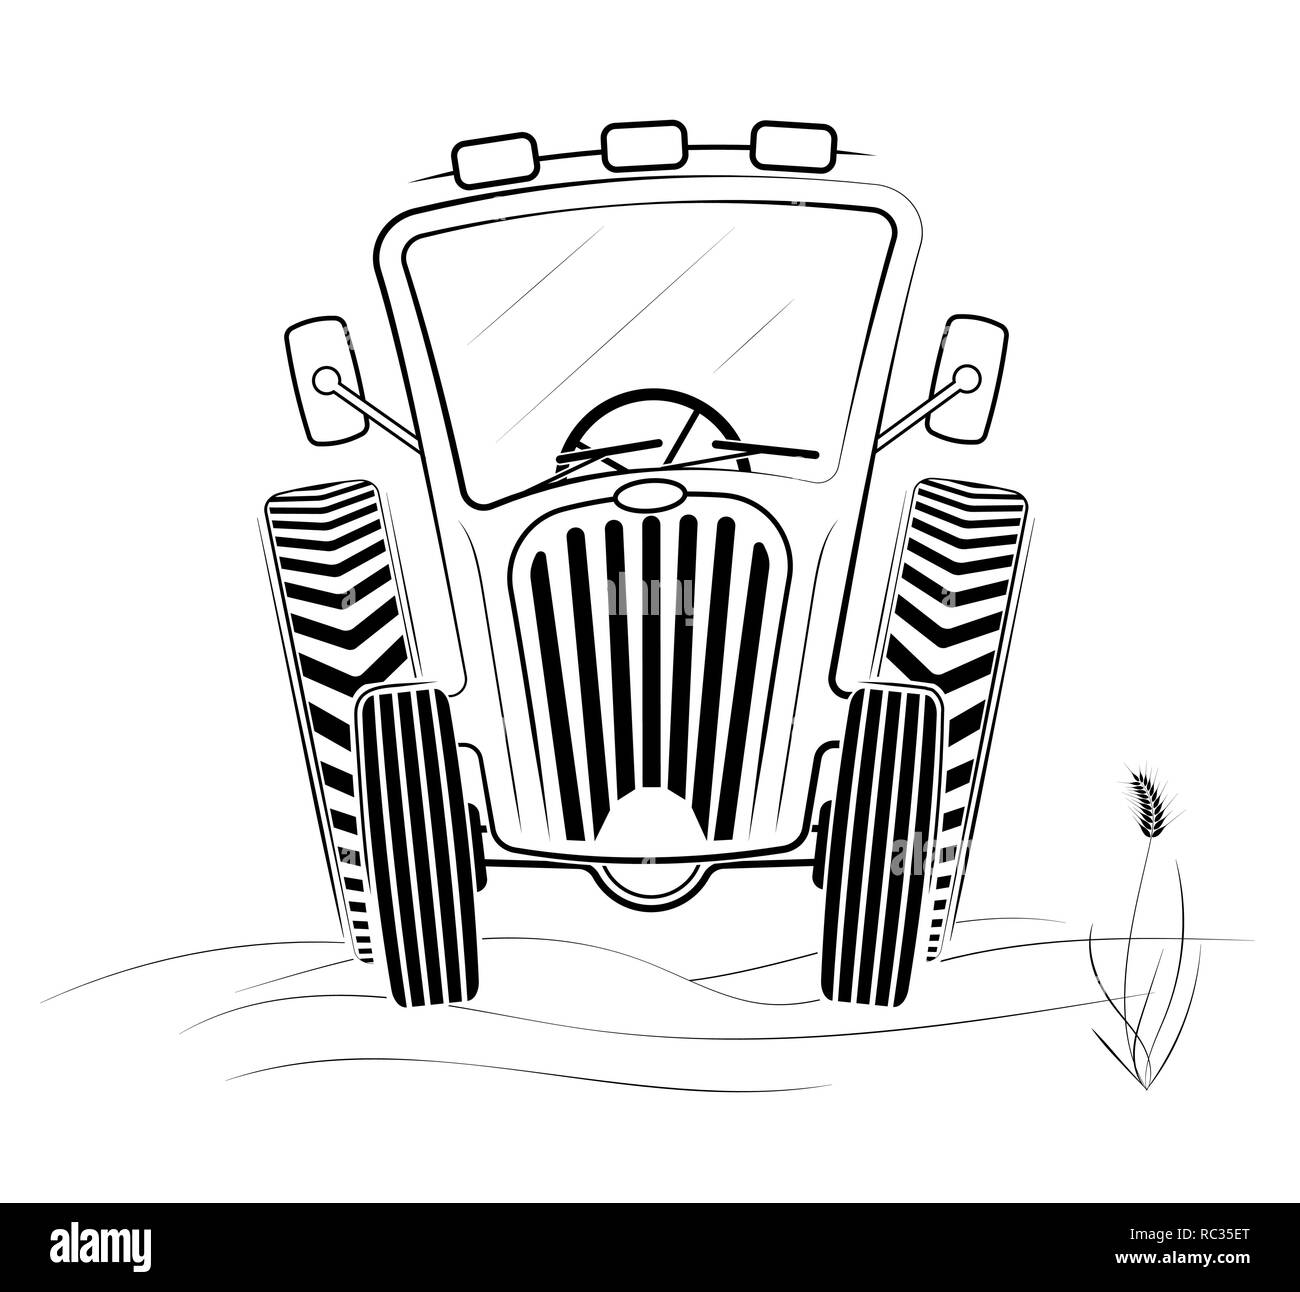 Black and white tractor profile in the field. A funny drawing. Spring work or harvesting. White background. Stock Vector